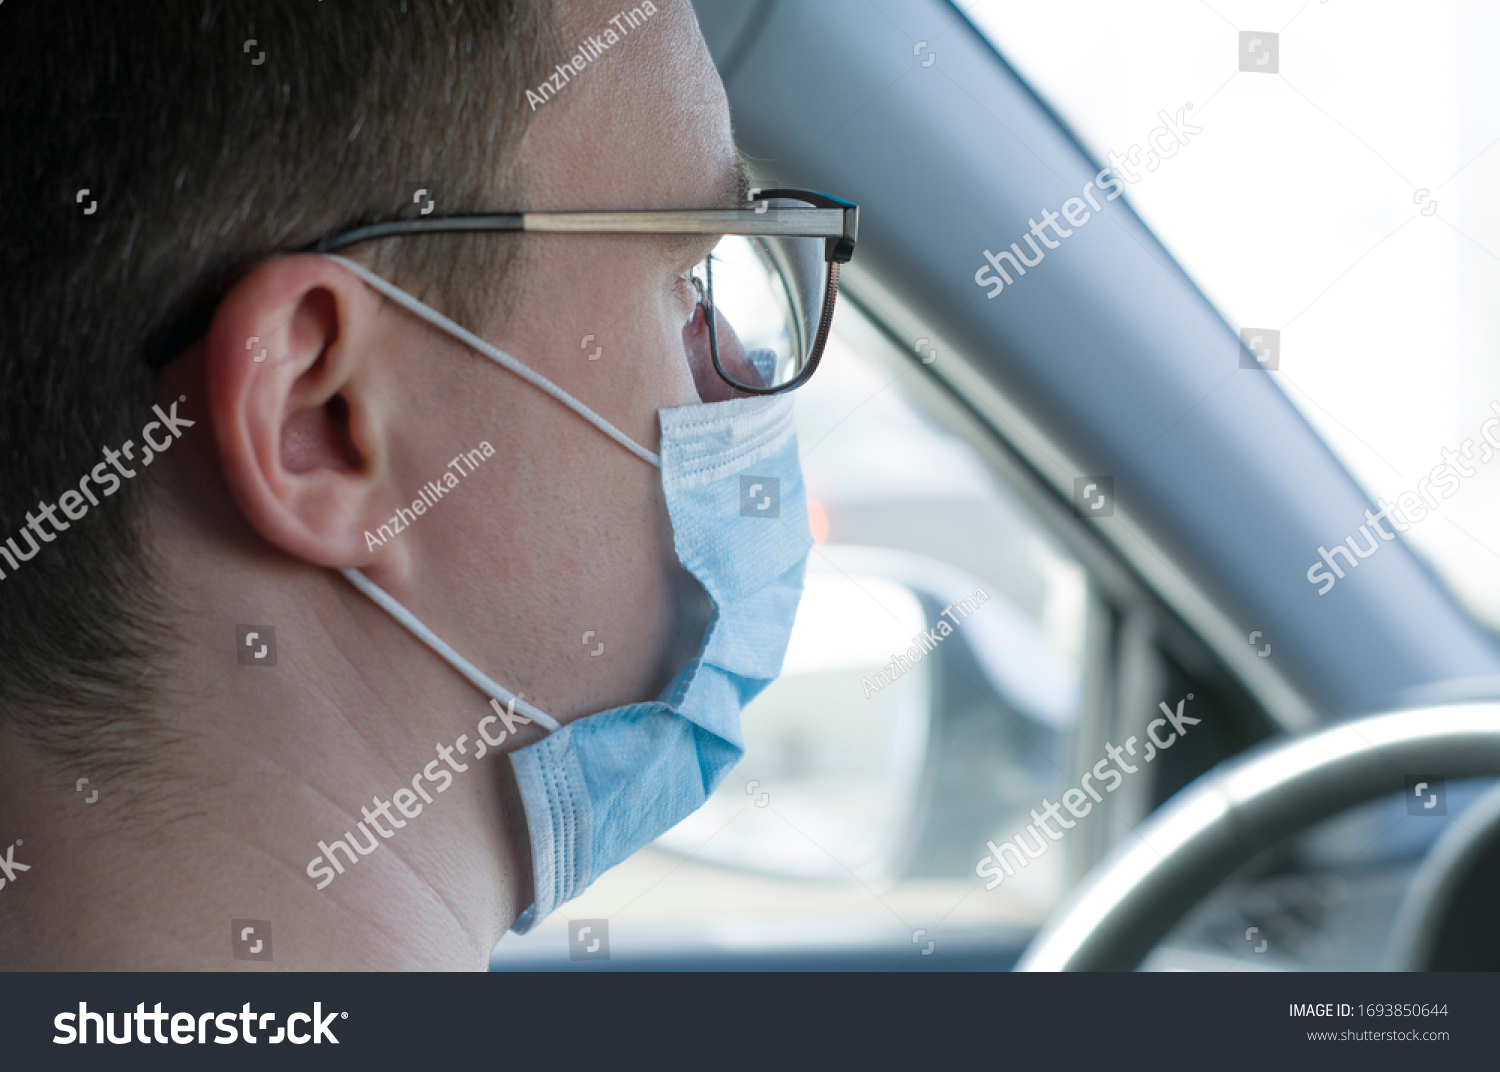 Coronavirus. a young male driver is sitting in a car wearing a medical mask. view from the back seat of the car. self-defense against the virus #1693850644